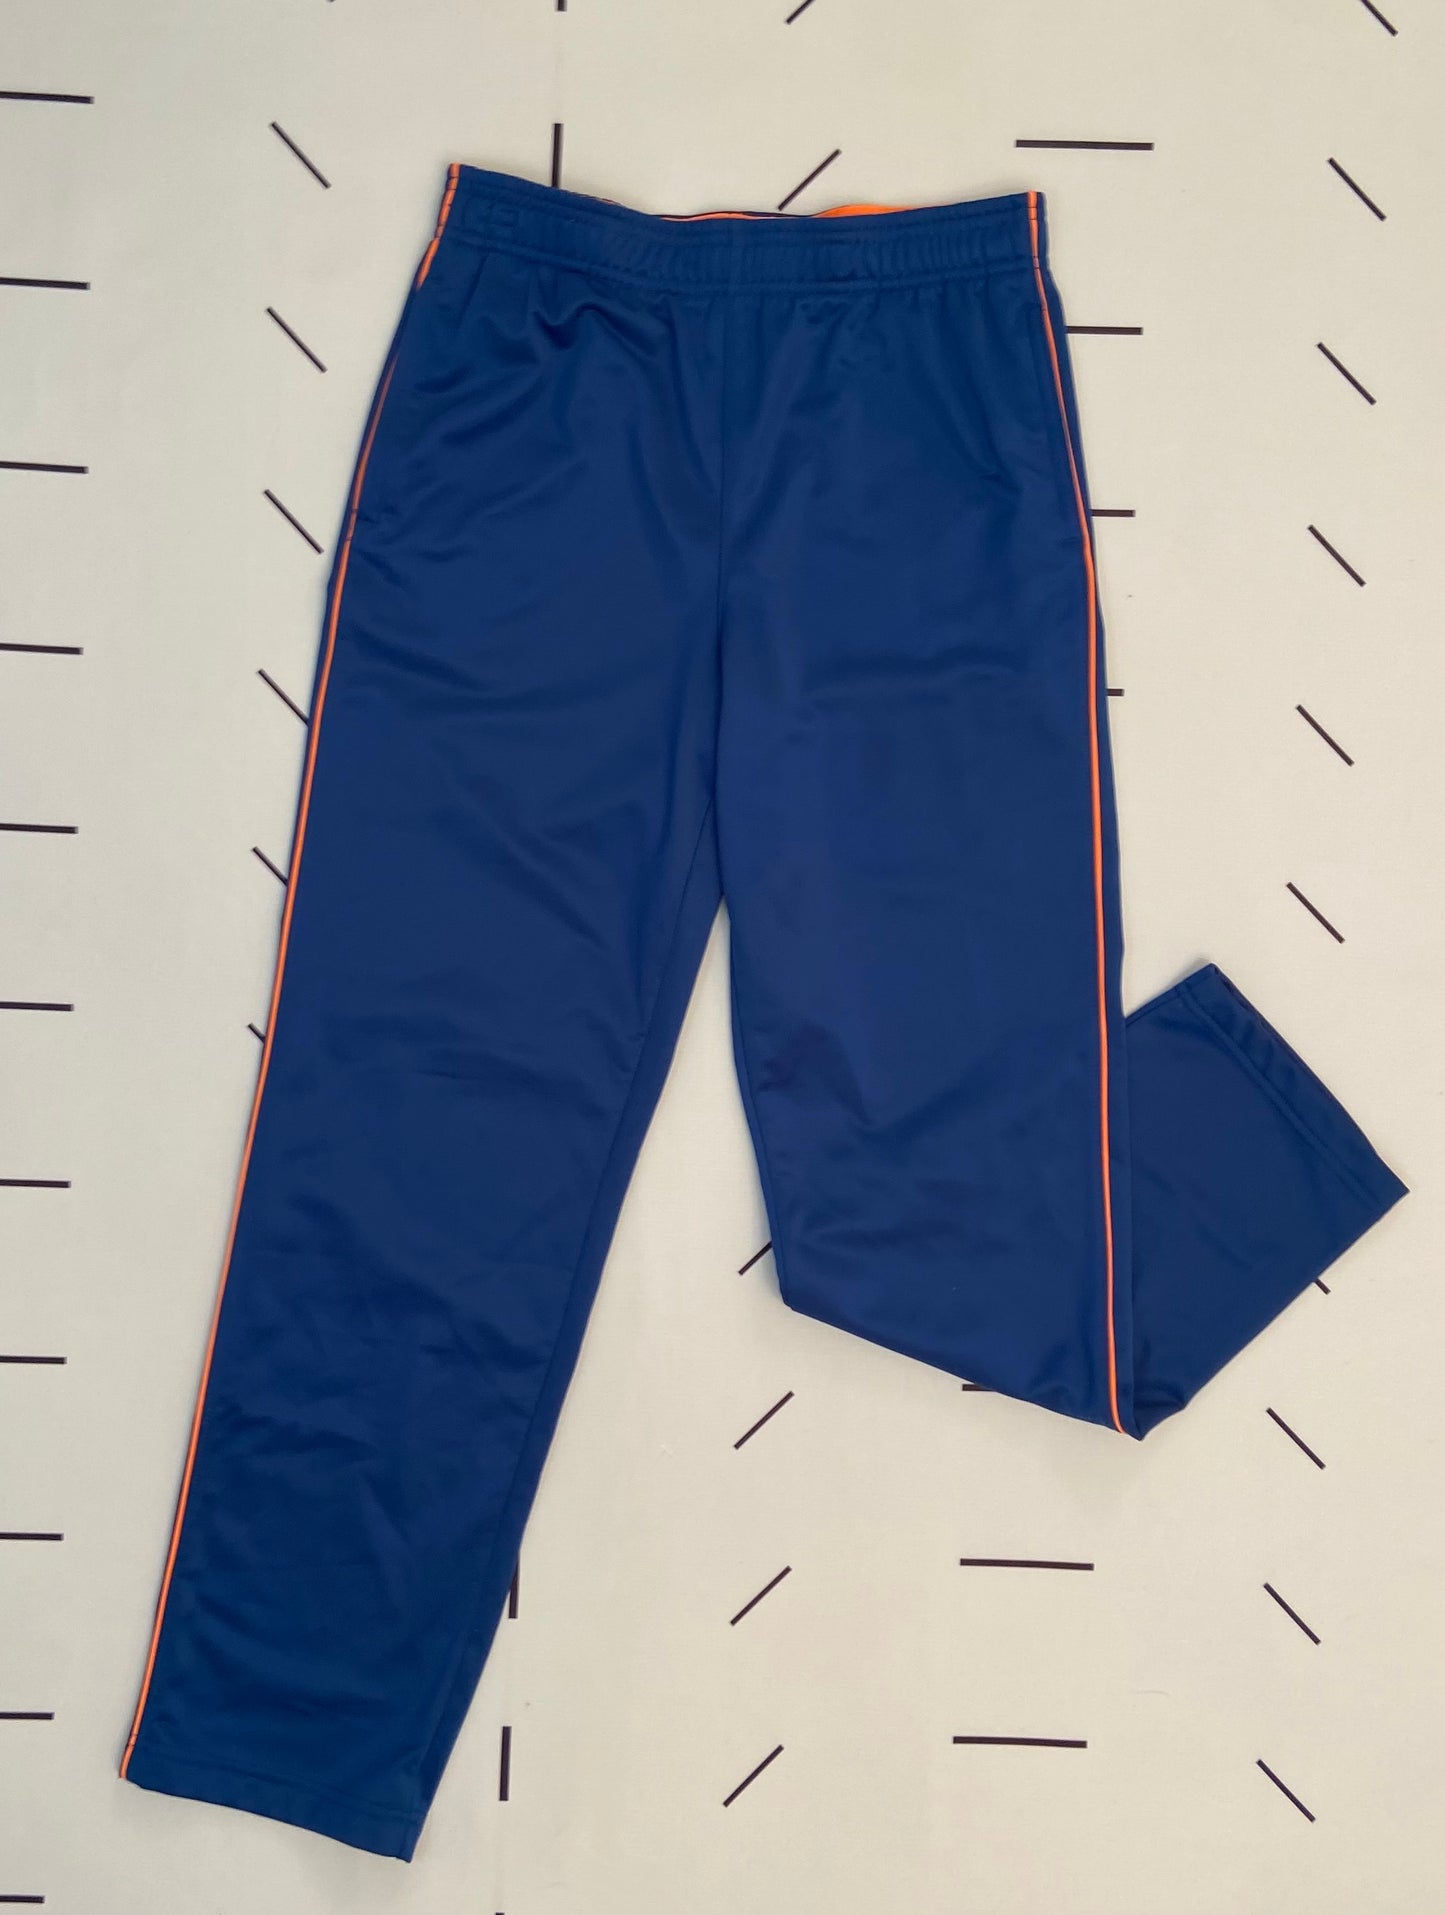 Navy Blue and Highlighter Orange Outfit Set- Youth XL